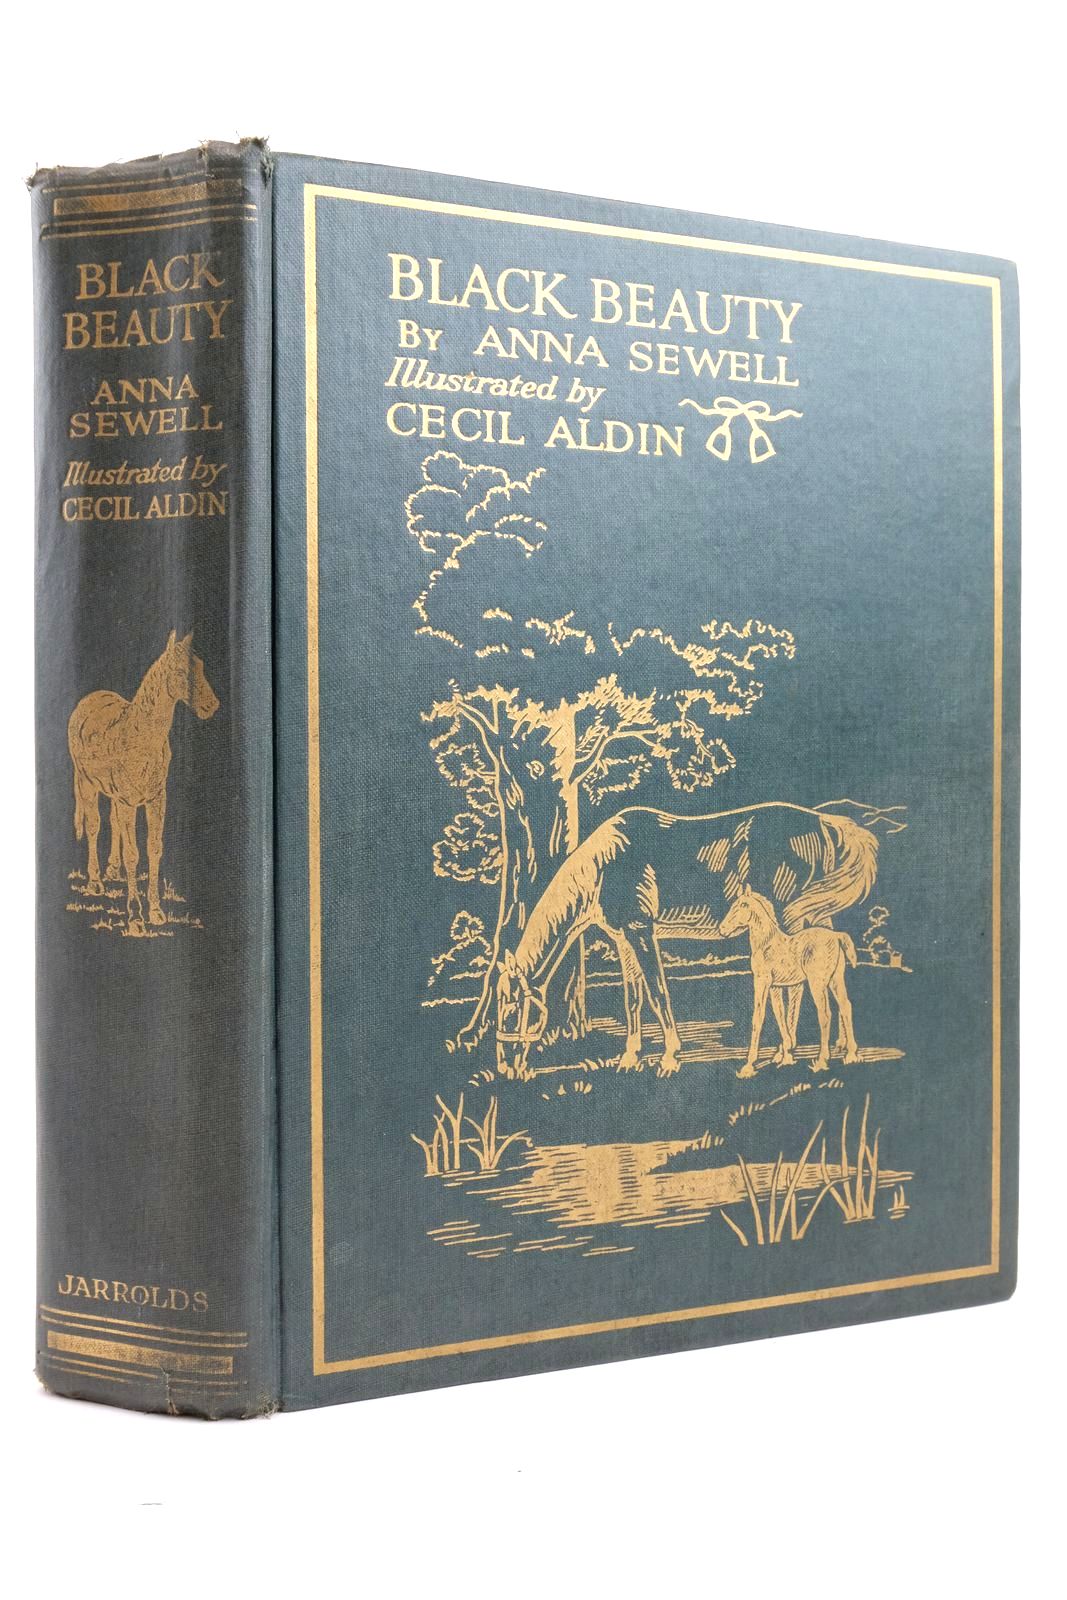 Photo of BLACK BEAUTY written by Sewell, Anna illustrated by Aldin, Cecil published by Jarrolds (STOCK CODE: 2136222)  for sale by Stella & Rose's Books